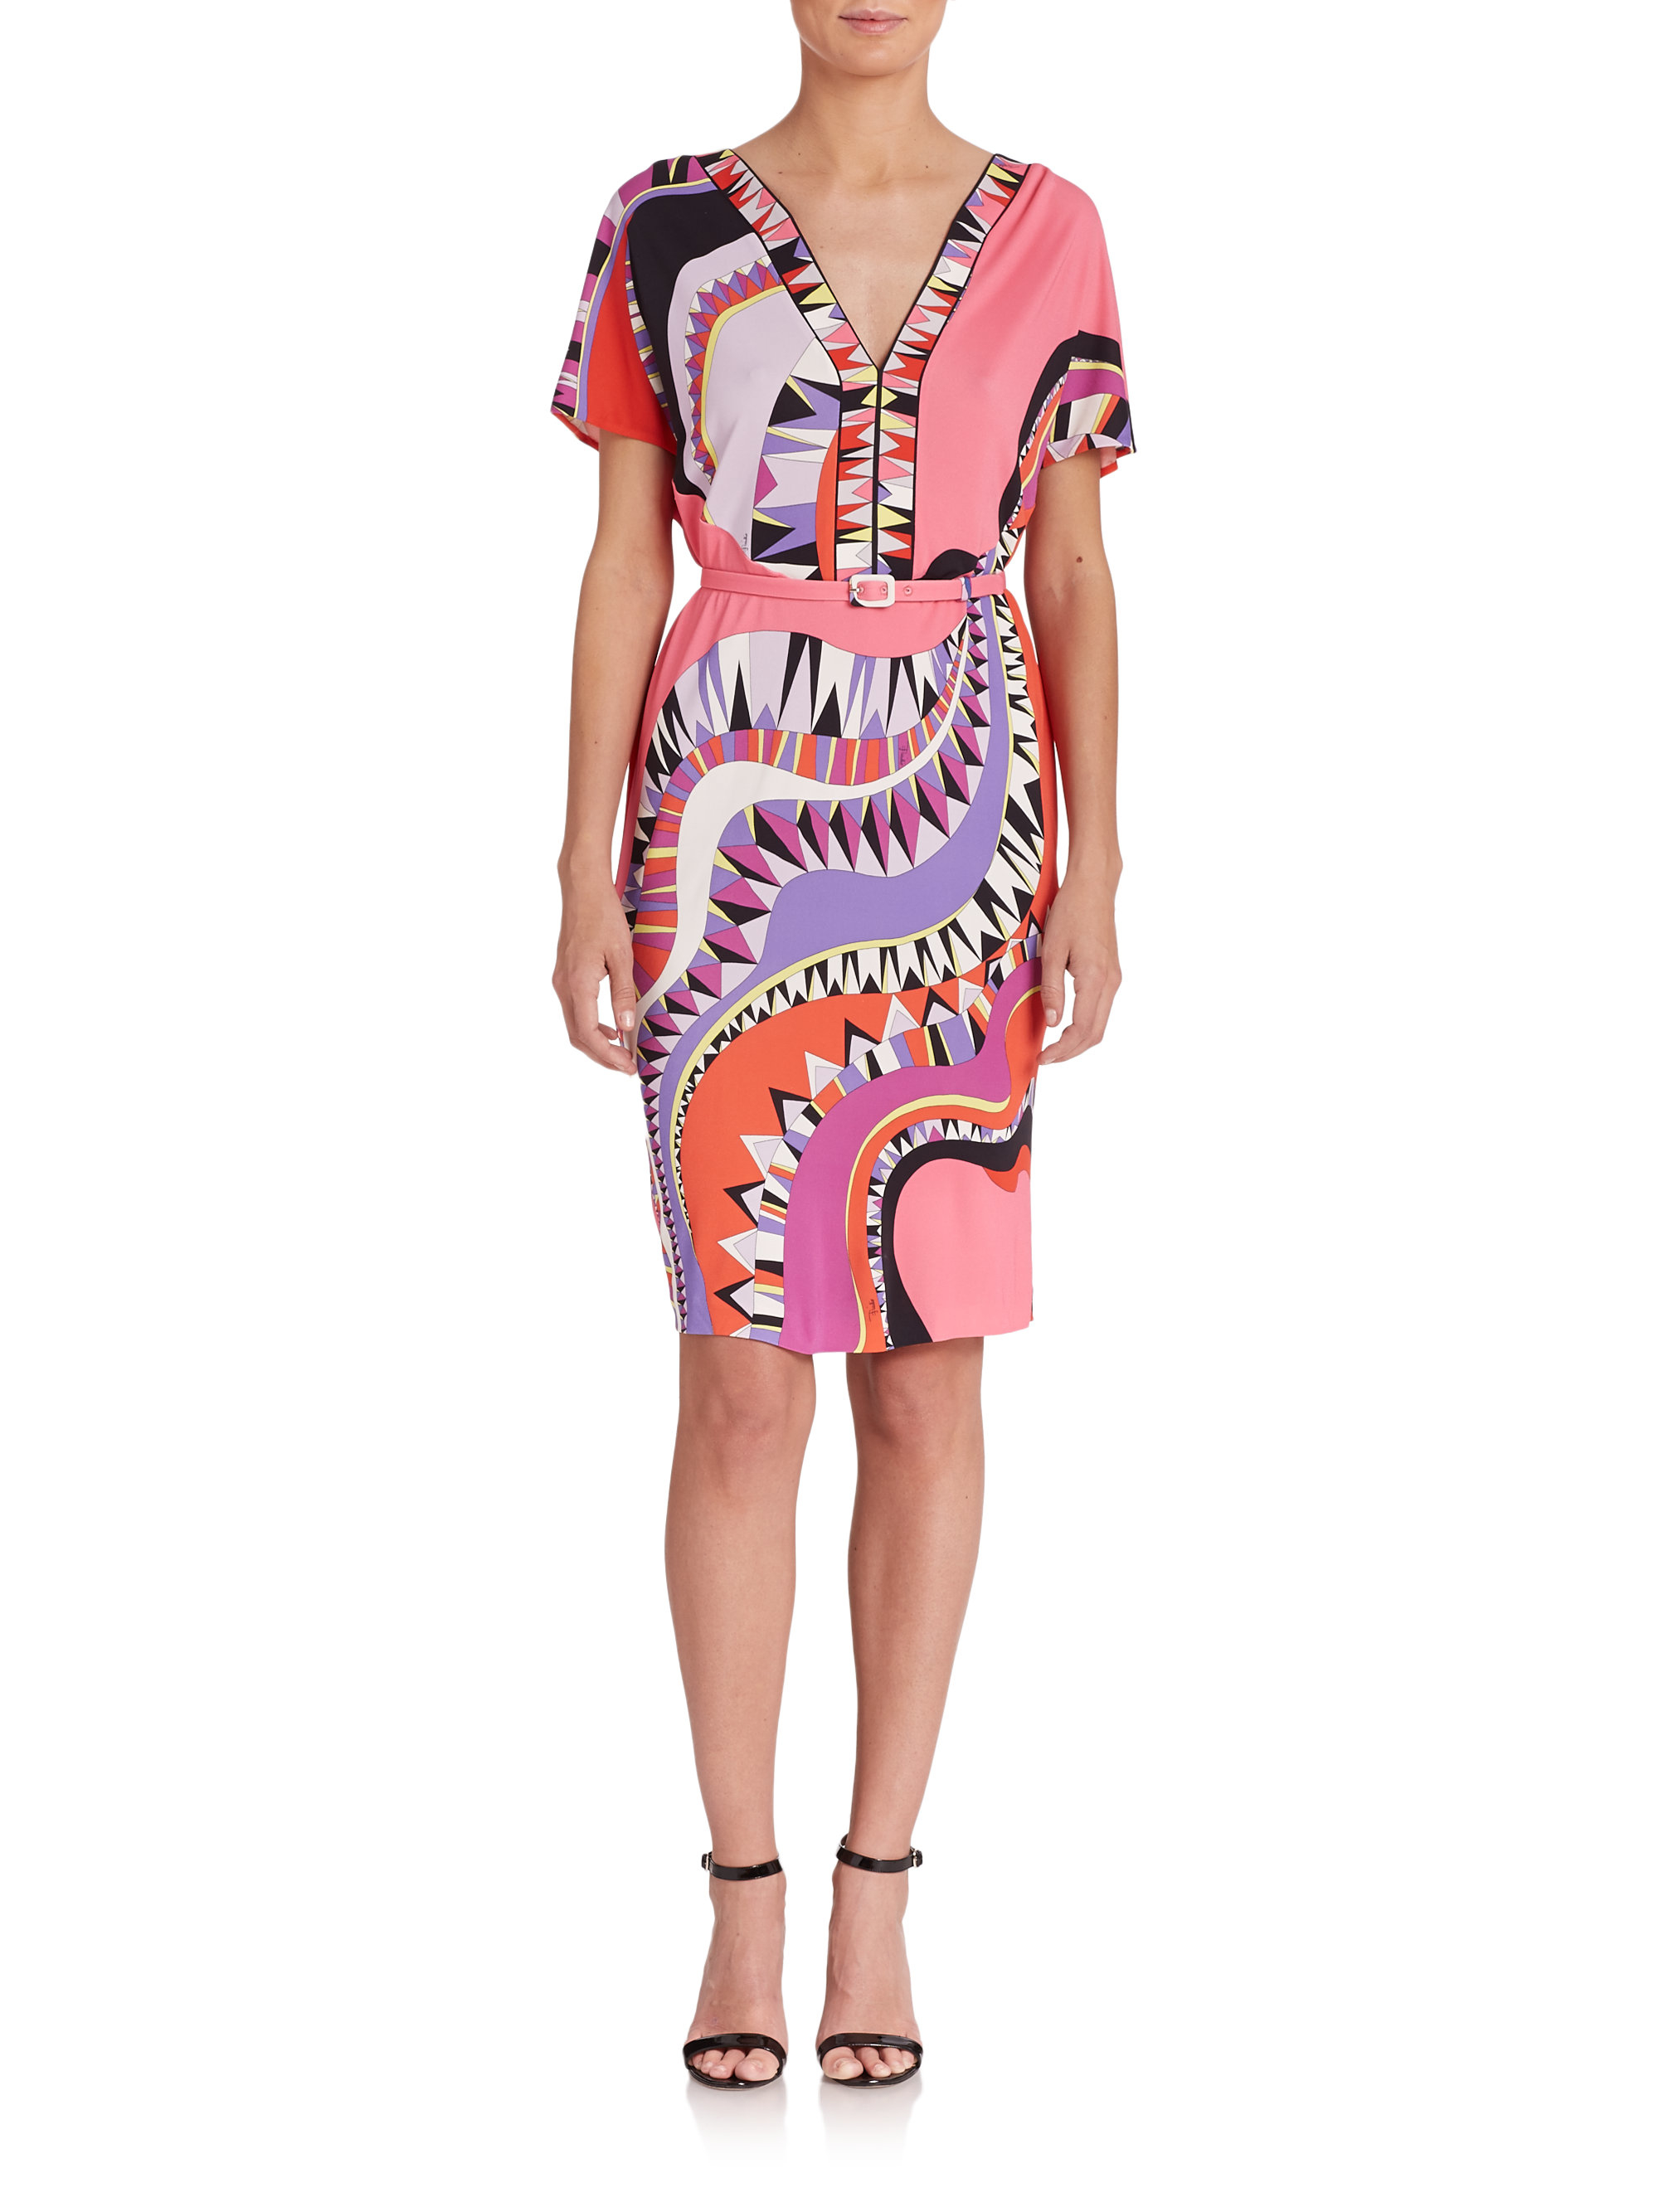 Lyst - Emilio Pucci Belted Abstract-print Dress